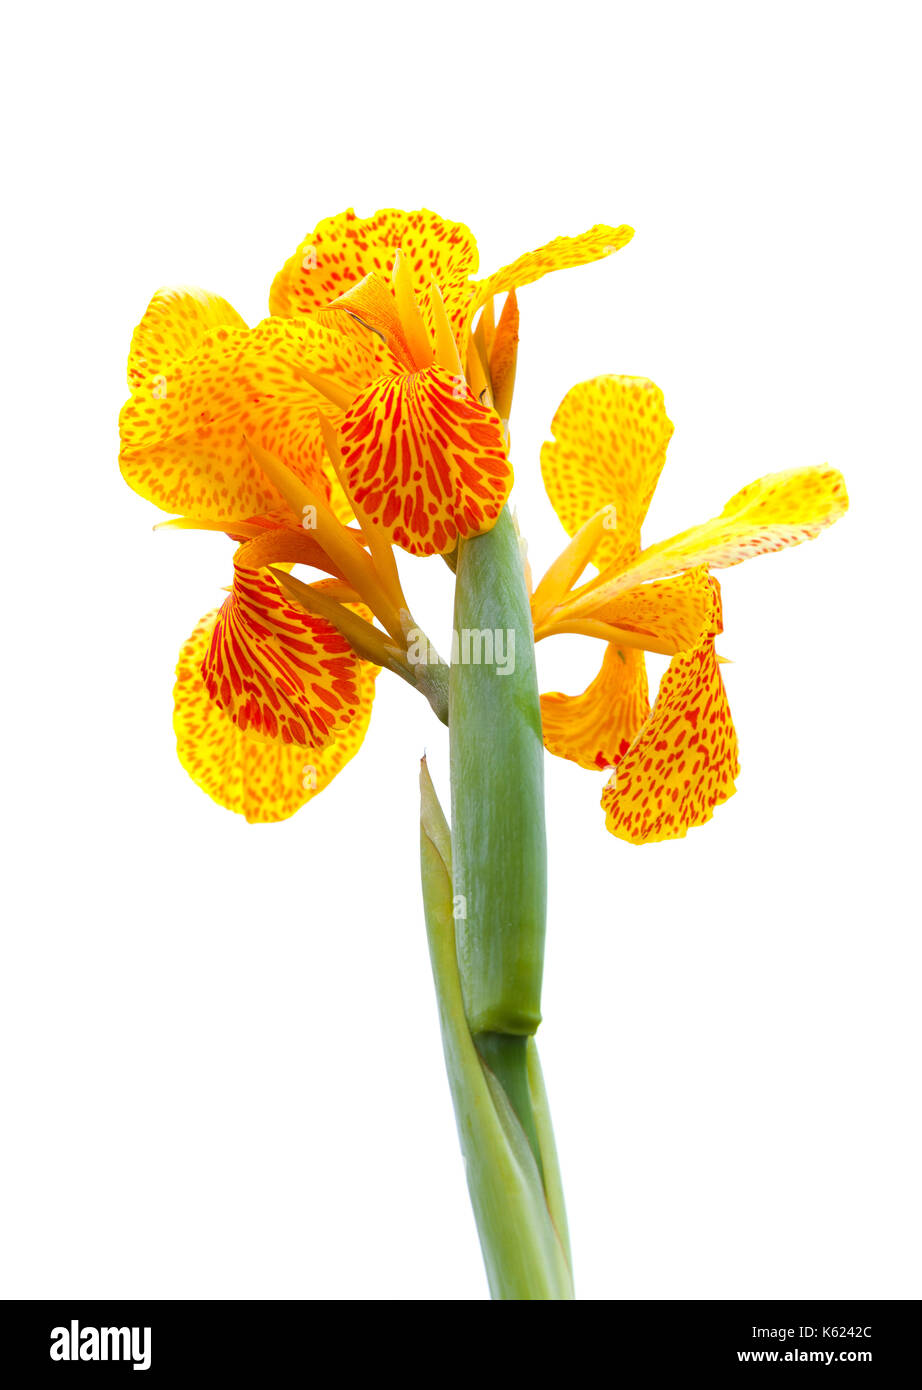 Bright Indian canna lily flower, close up photo isolated on white background Stock Photo